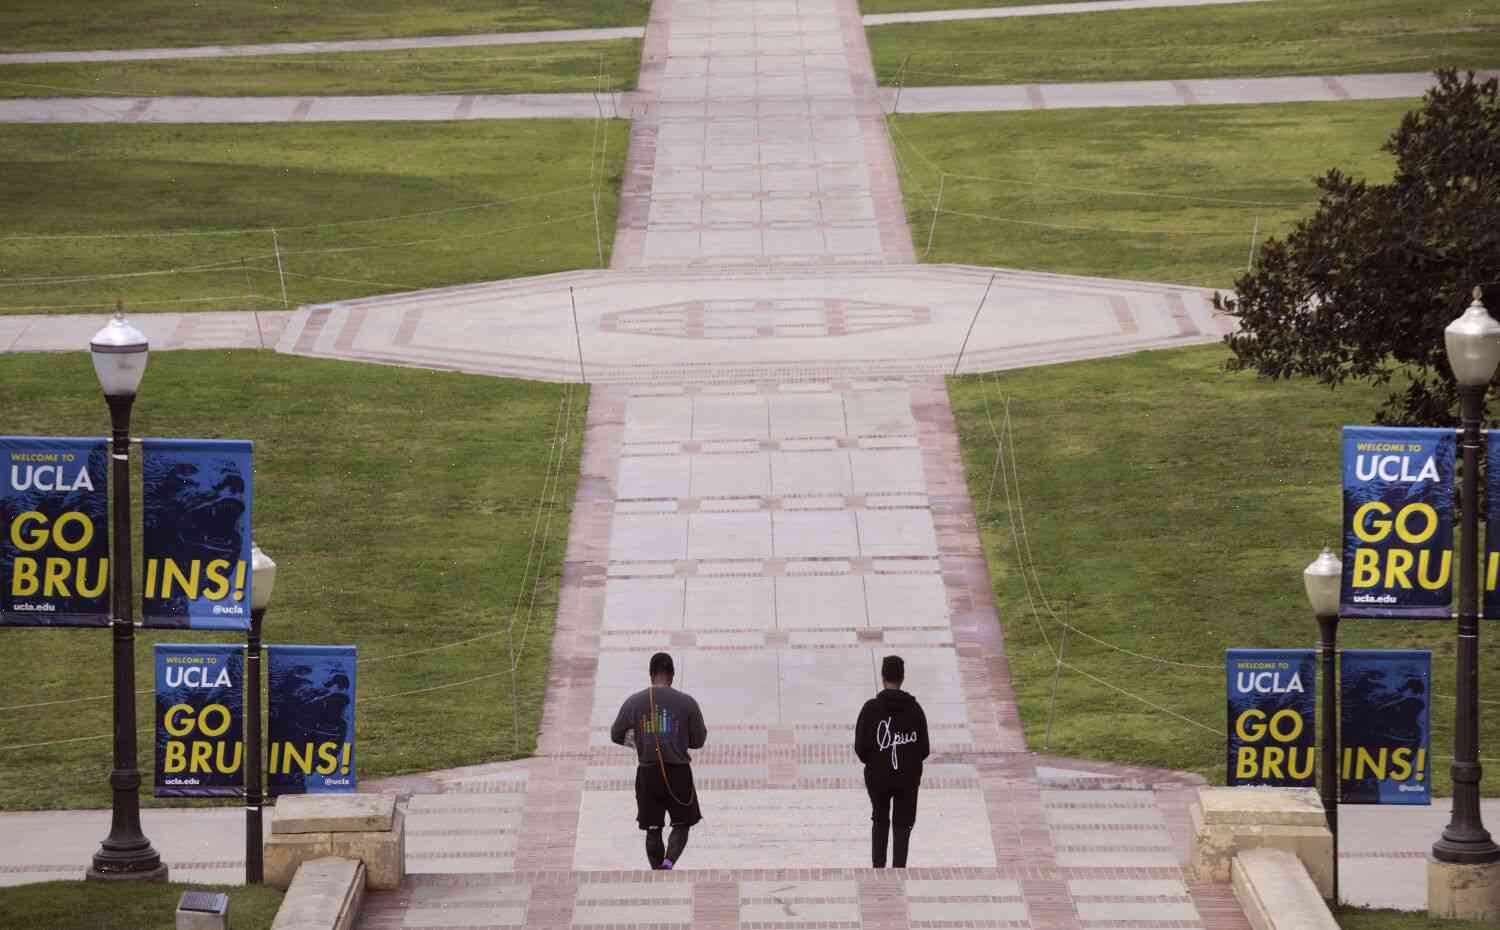 UCLA summer school under fire over sexual harassment, sexual harassment